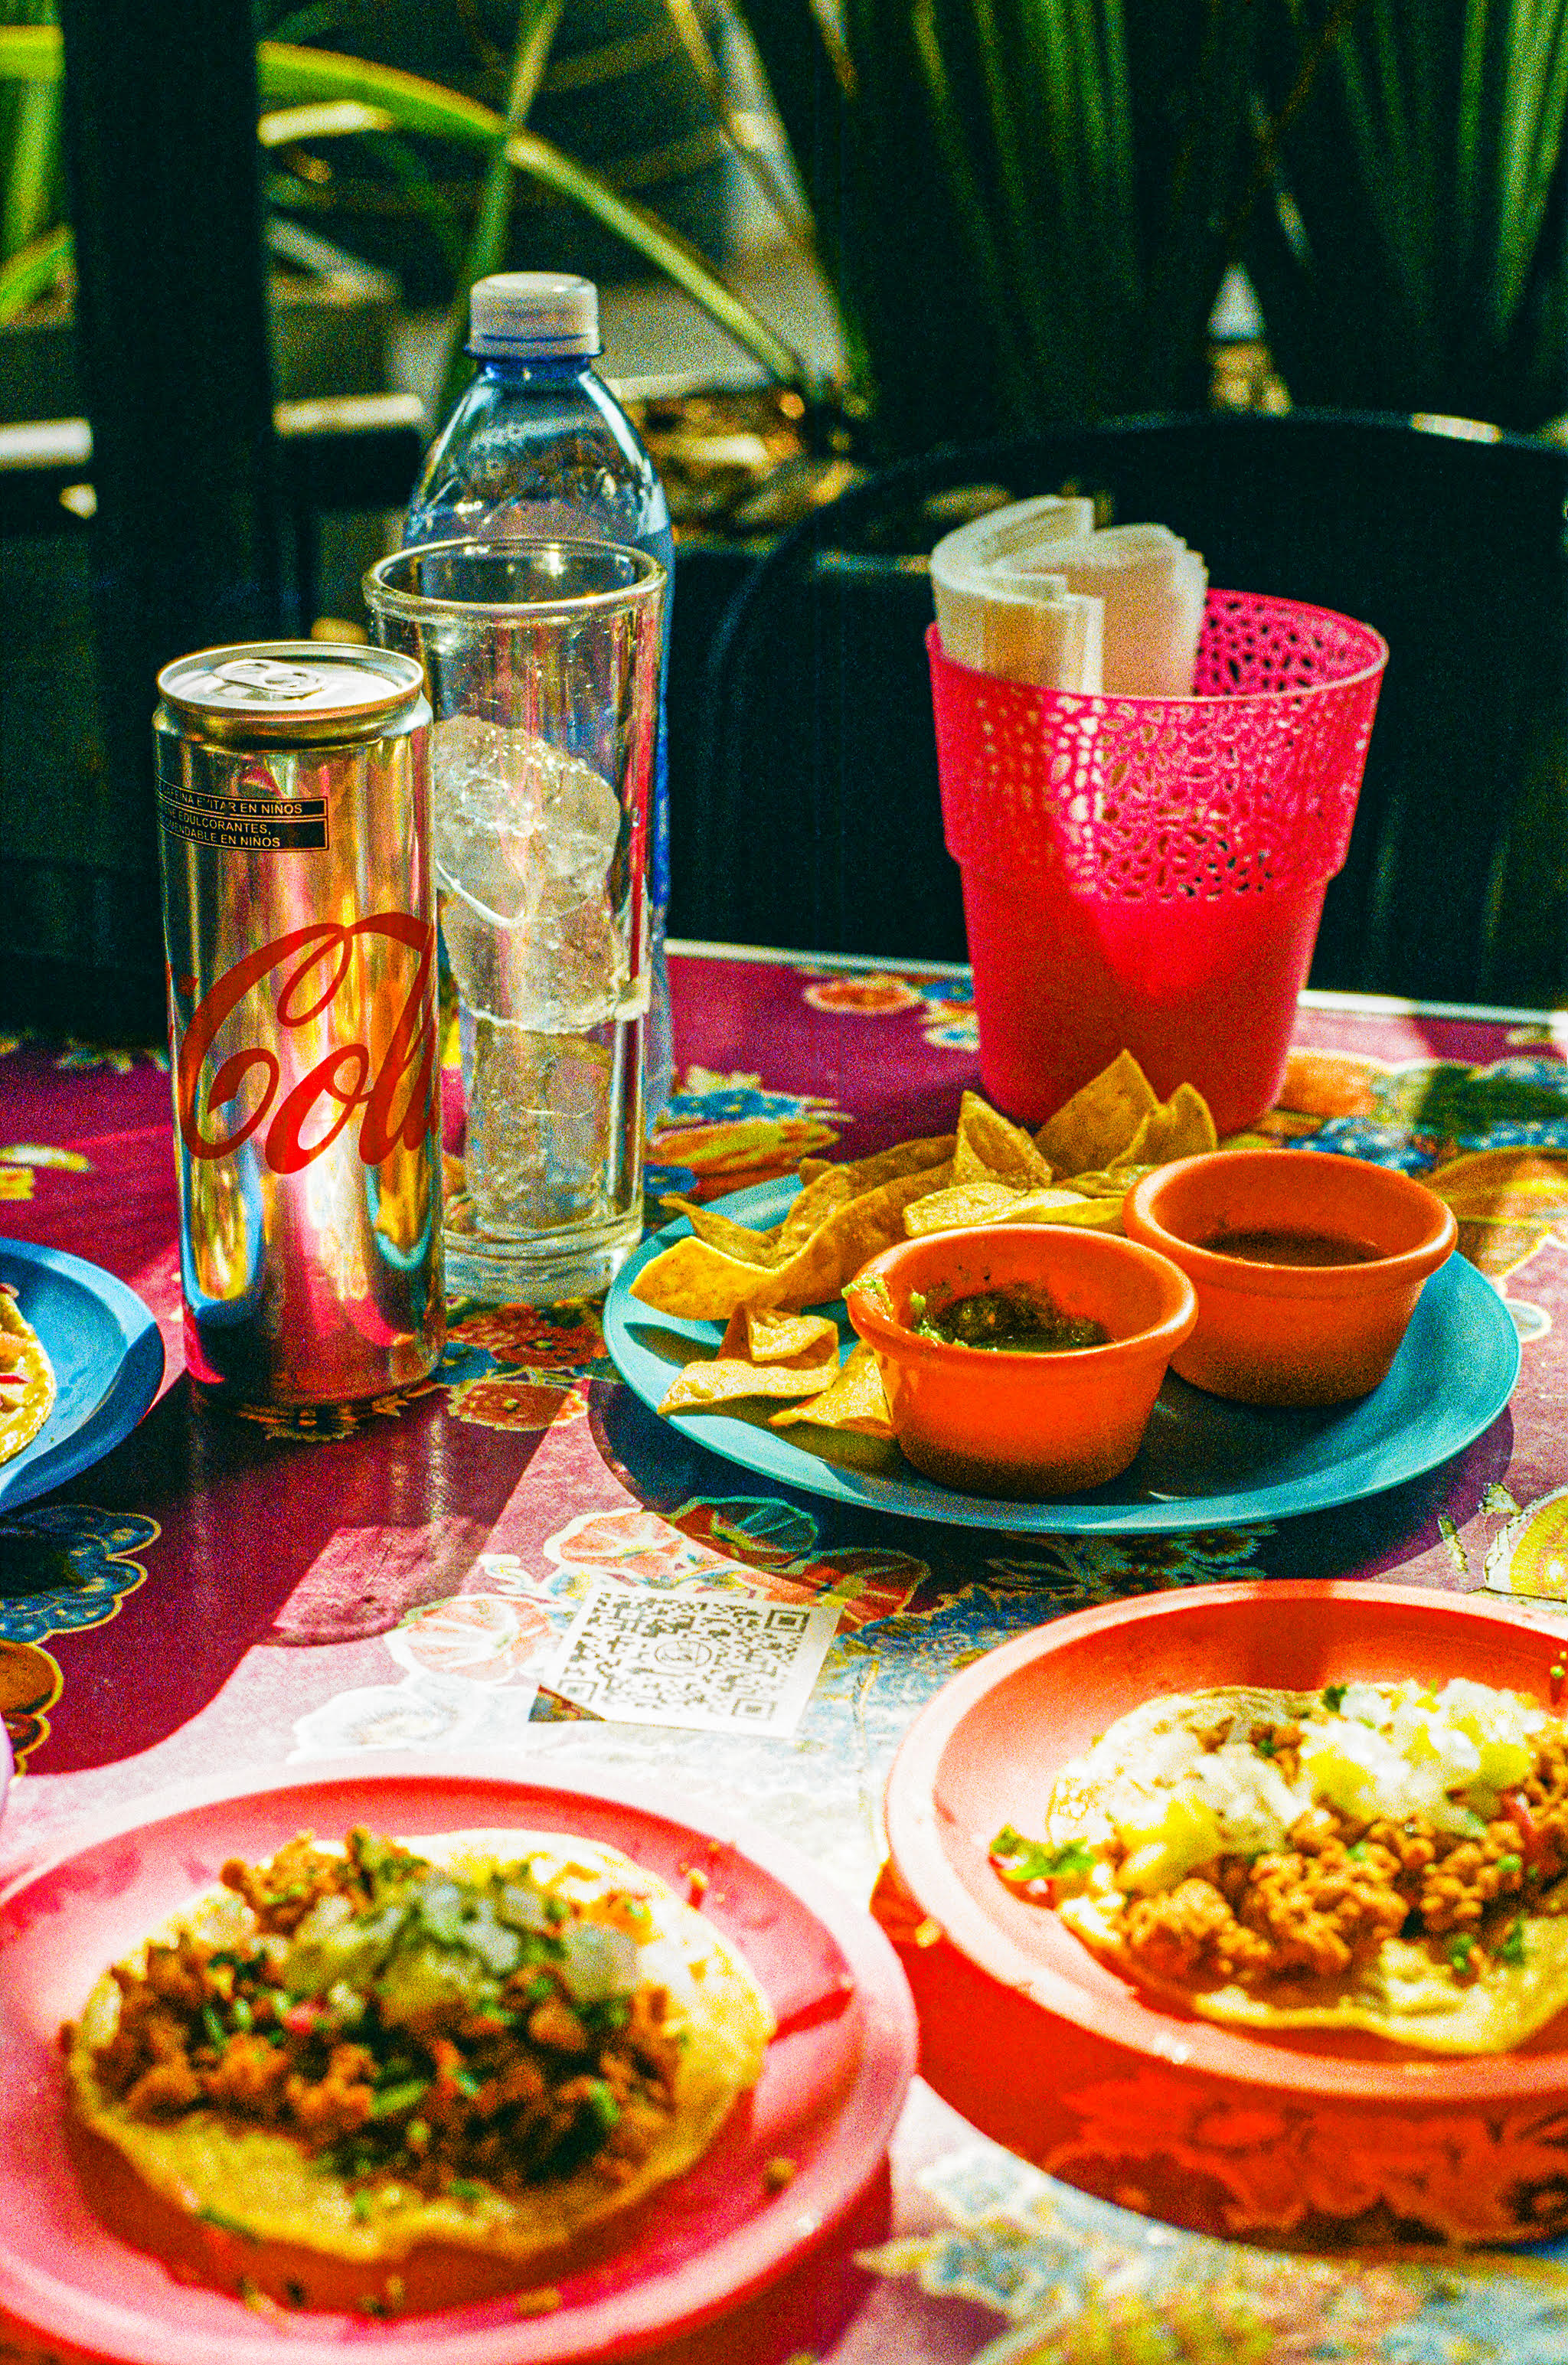 taco, diet coke and food from mexico city